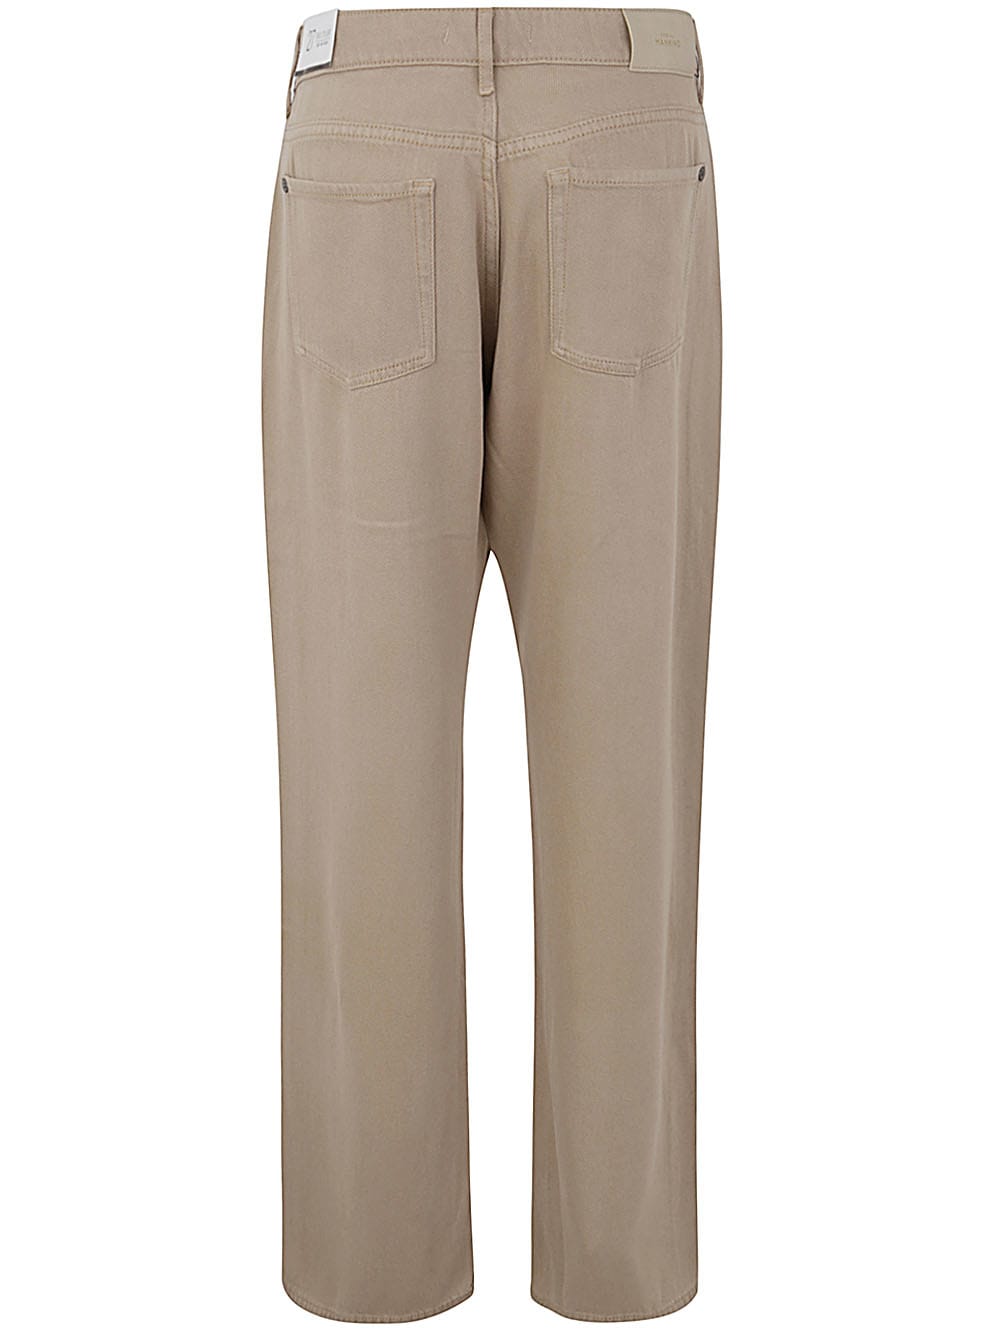 Shop 7 For All Mankind Tess Trouser Colored Tencel Sand In Beige